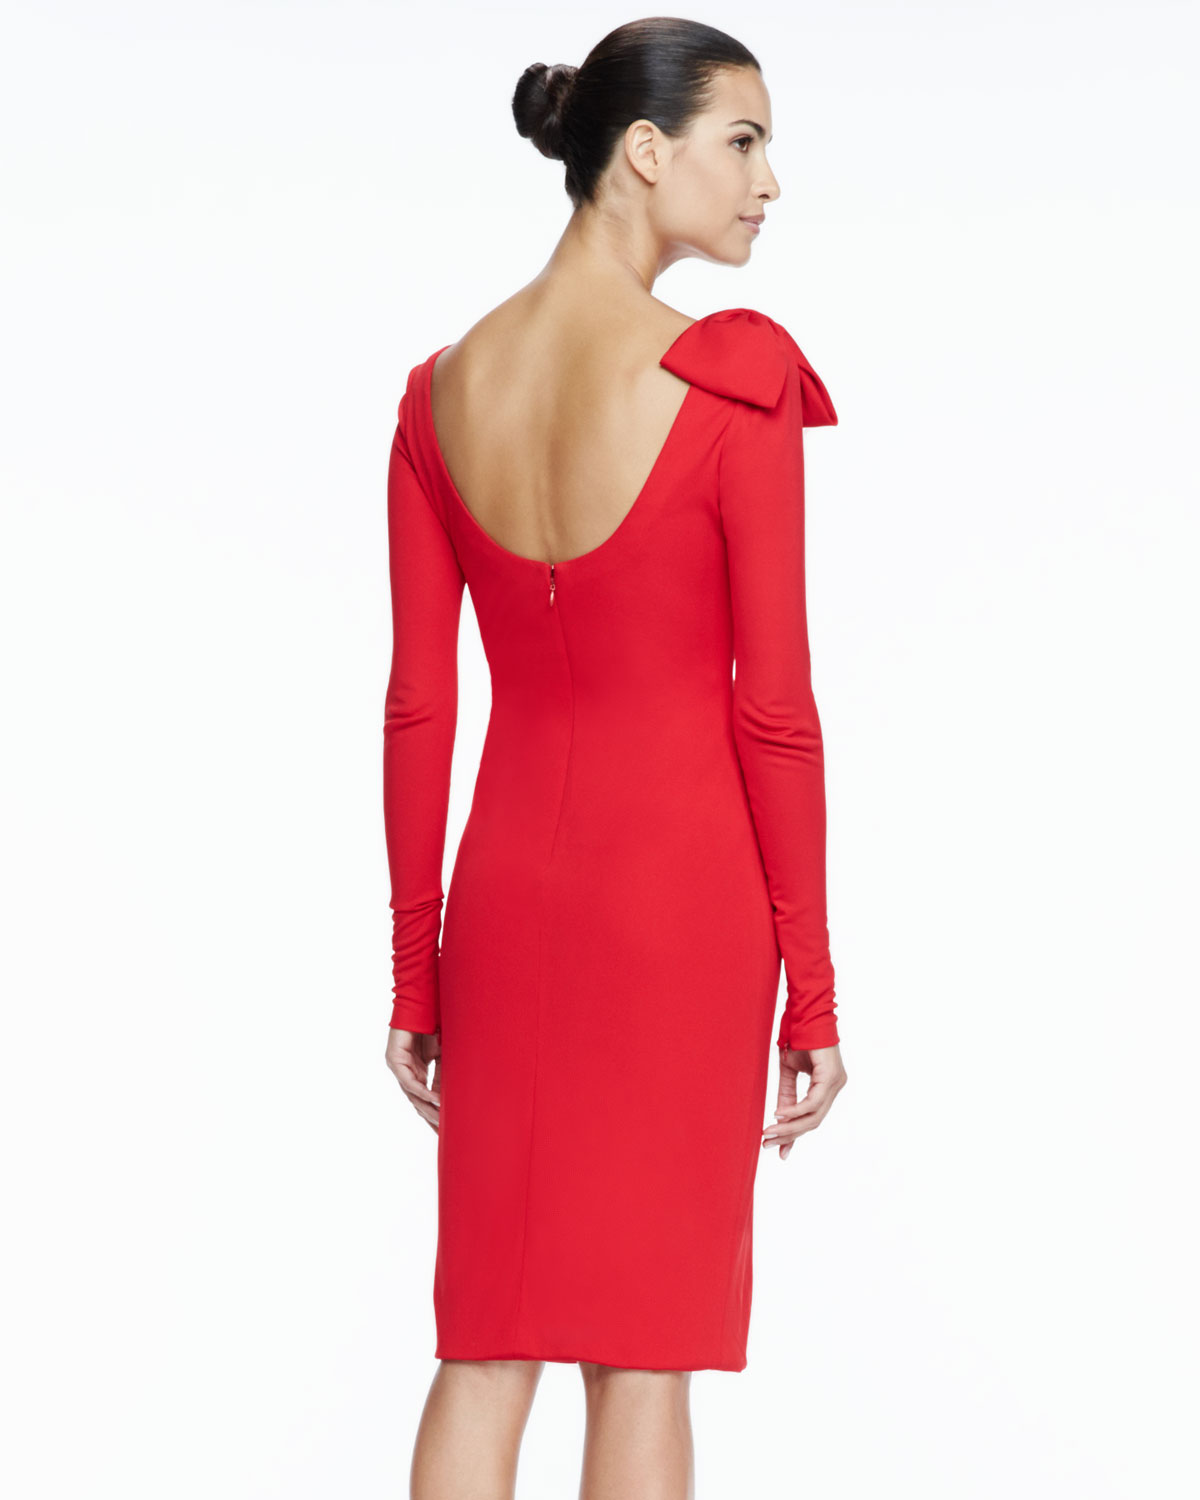 Lyst - Badgley Mischka Longsleeve Bowdetail Cocktail Dress in Red